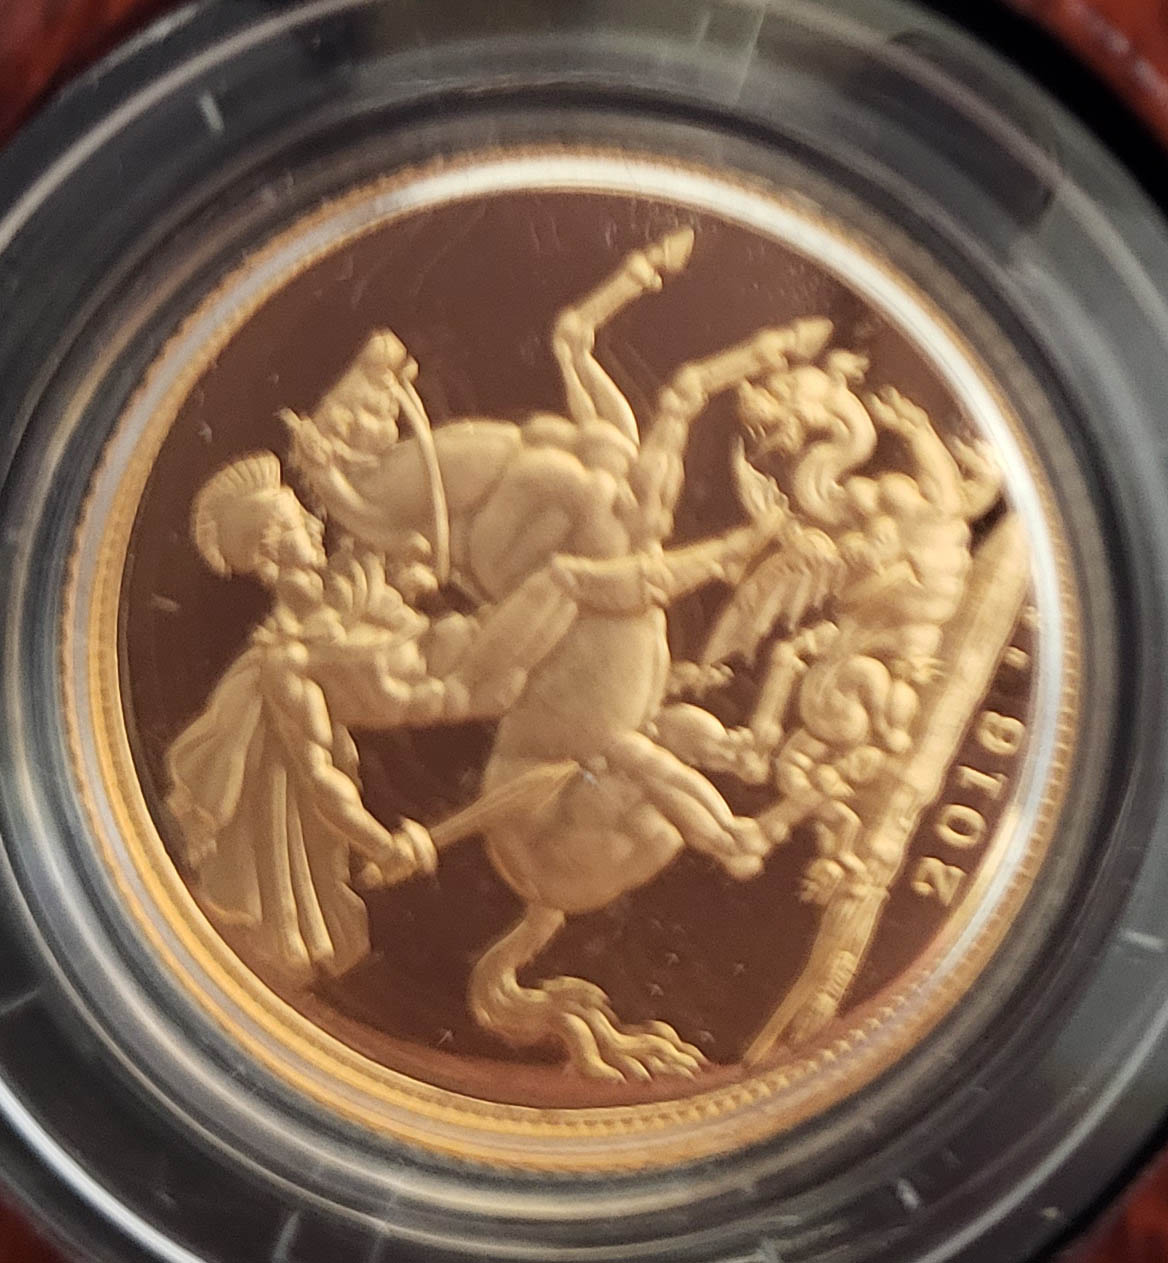 A 22CT GOLD FULL SOVEREIGN PROOF COIN, DATED 2016 With George and Dragon to reverse, in a protective - Image 2 of 5